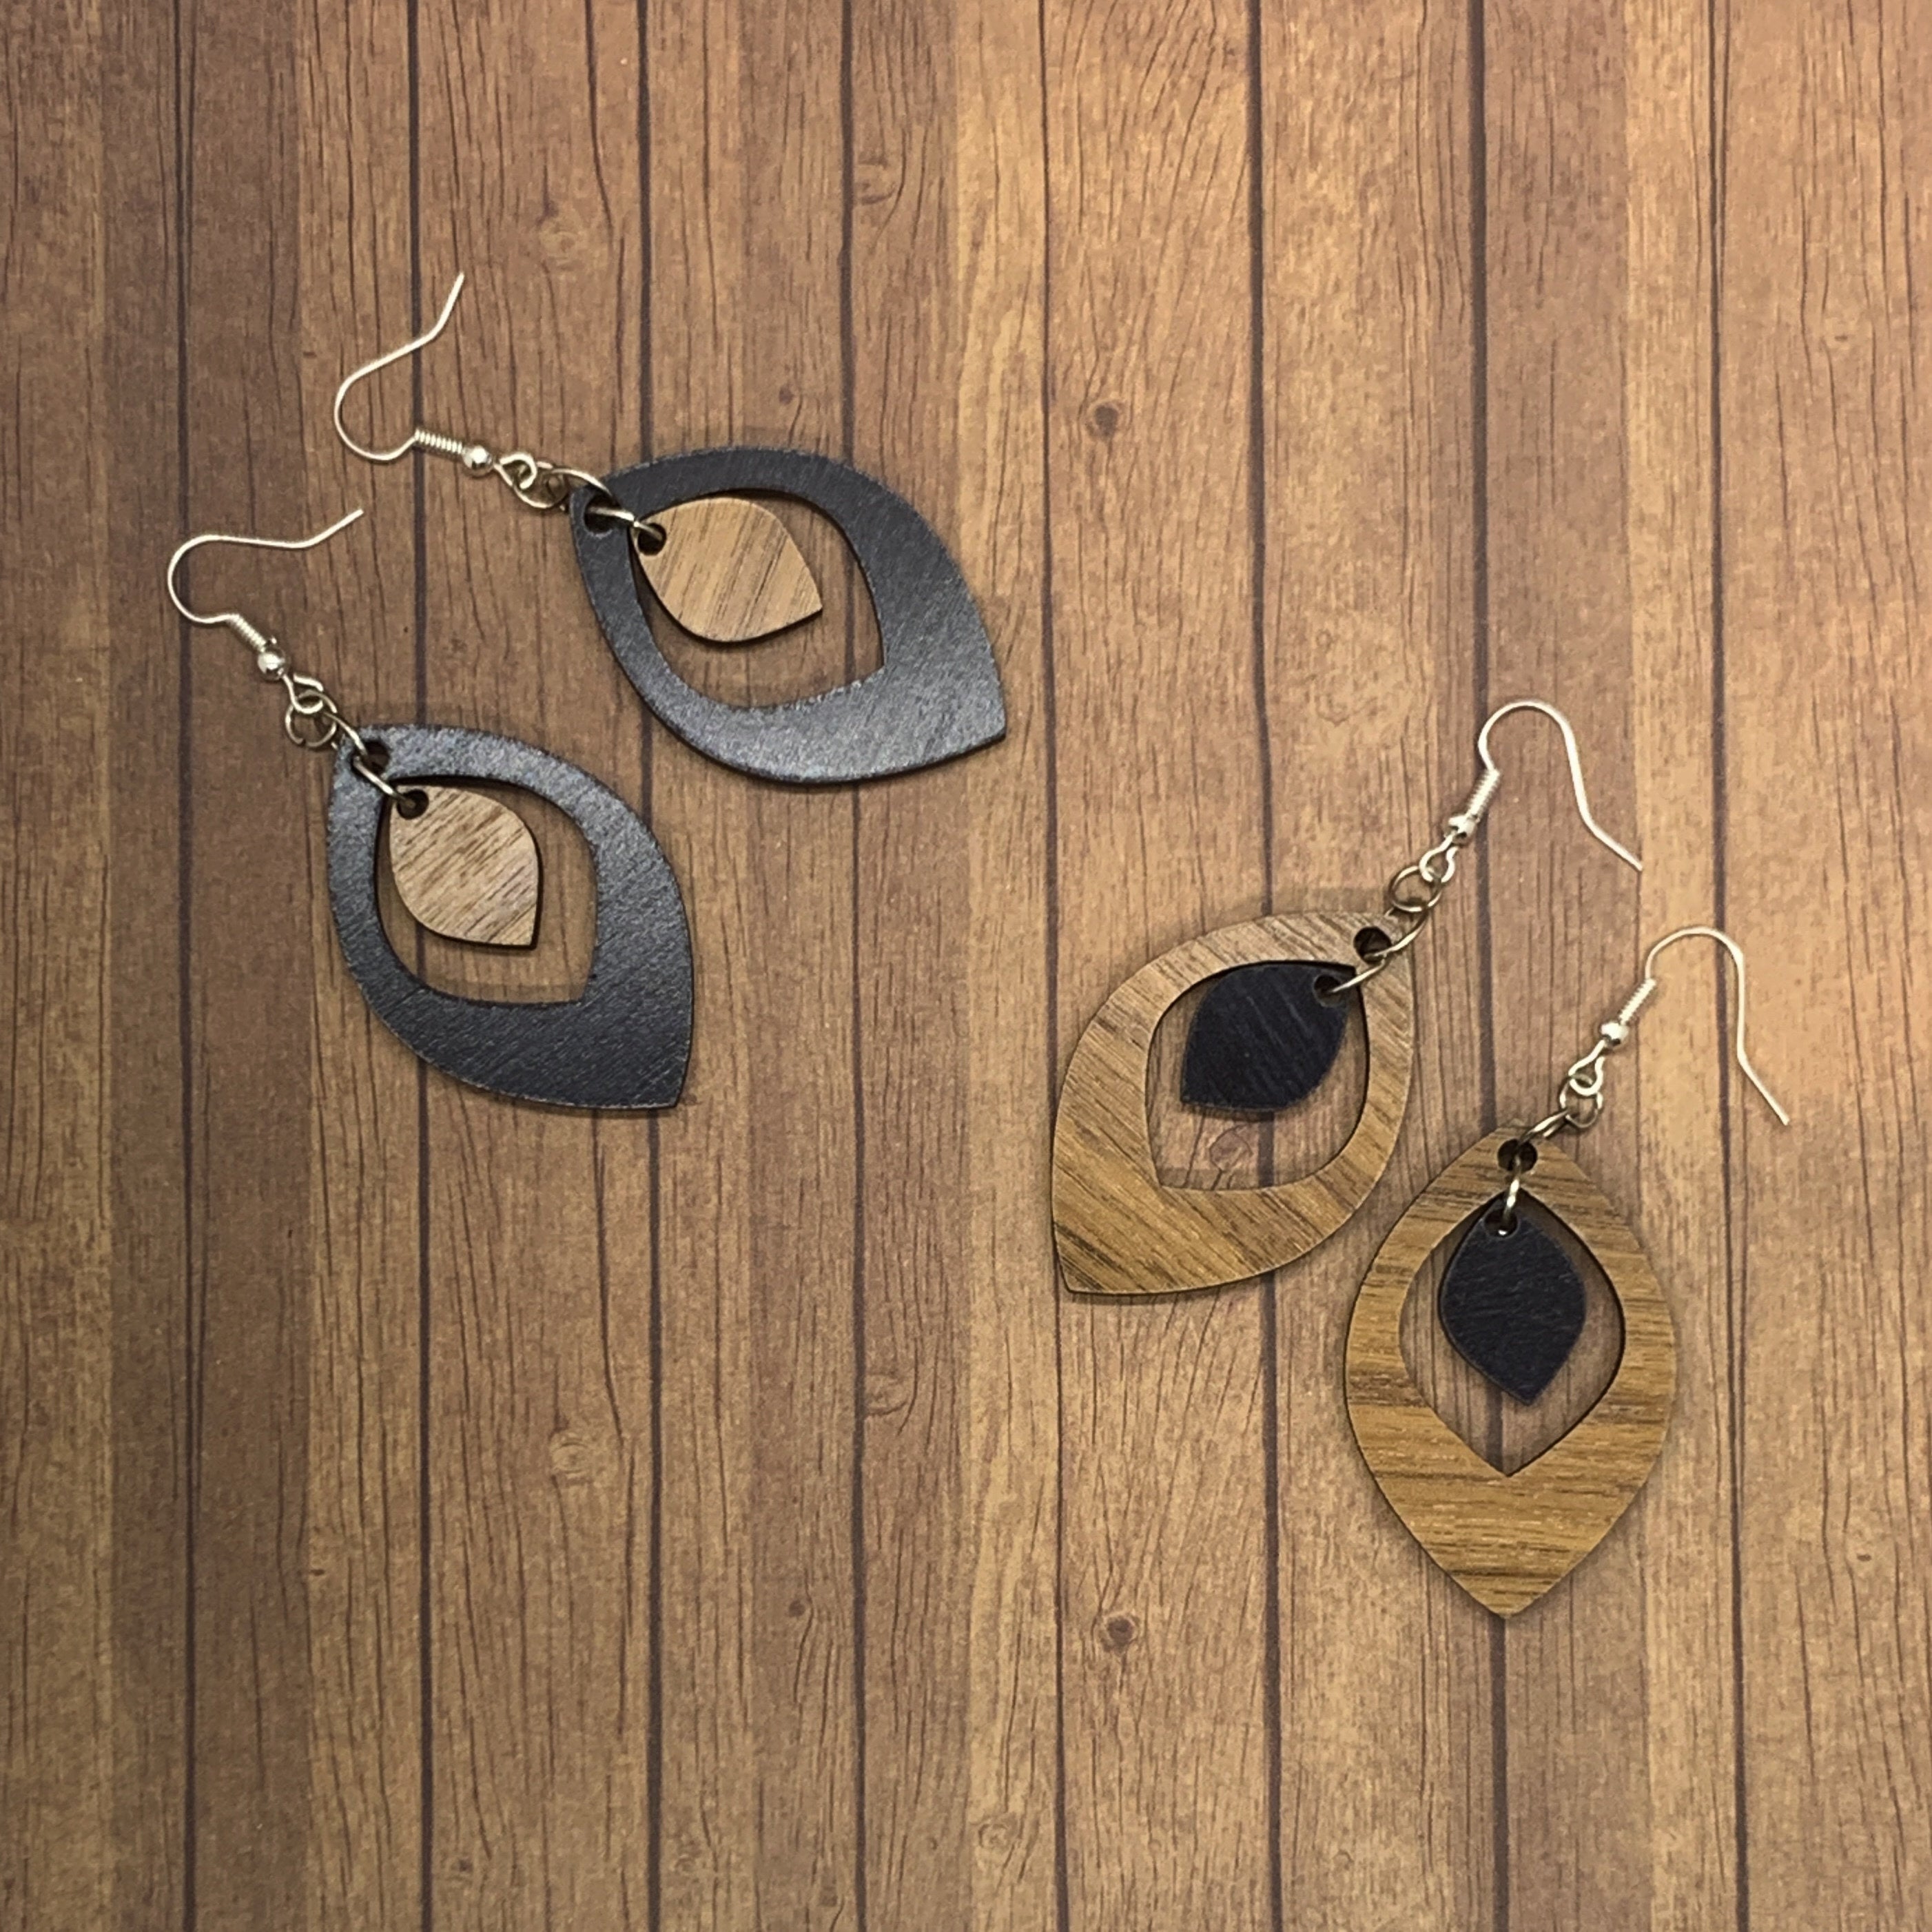 Wood Earrings – Sticks, Stones and Stitches Appalachian Crafts